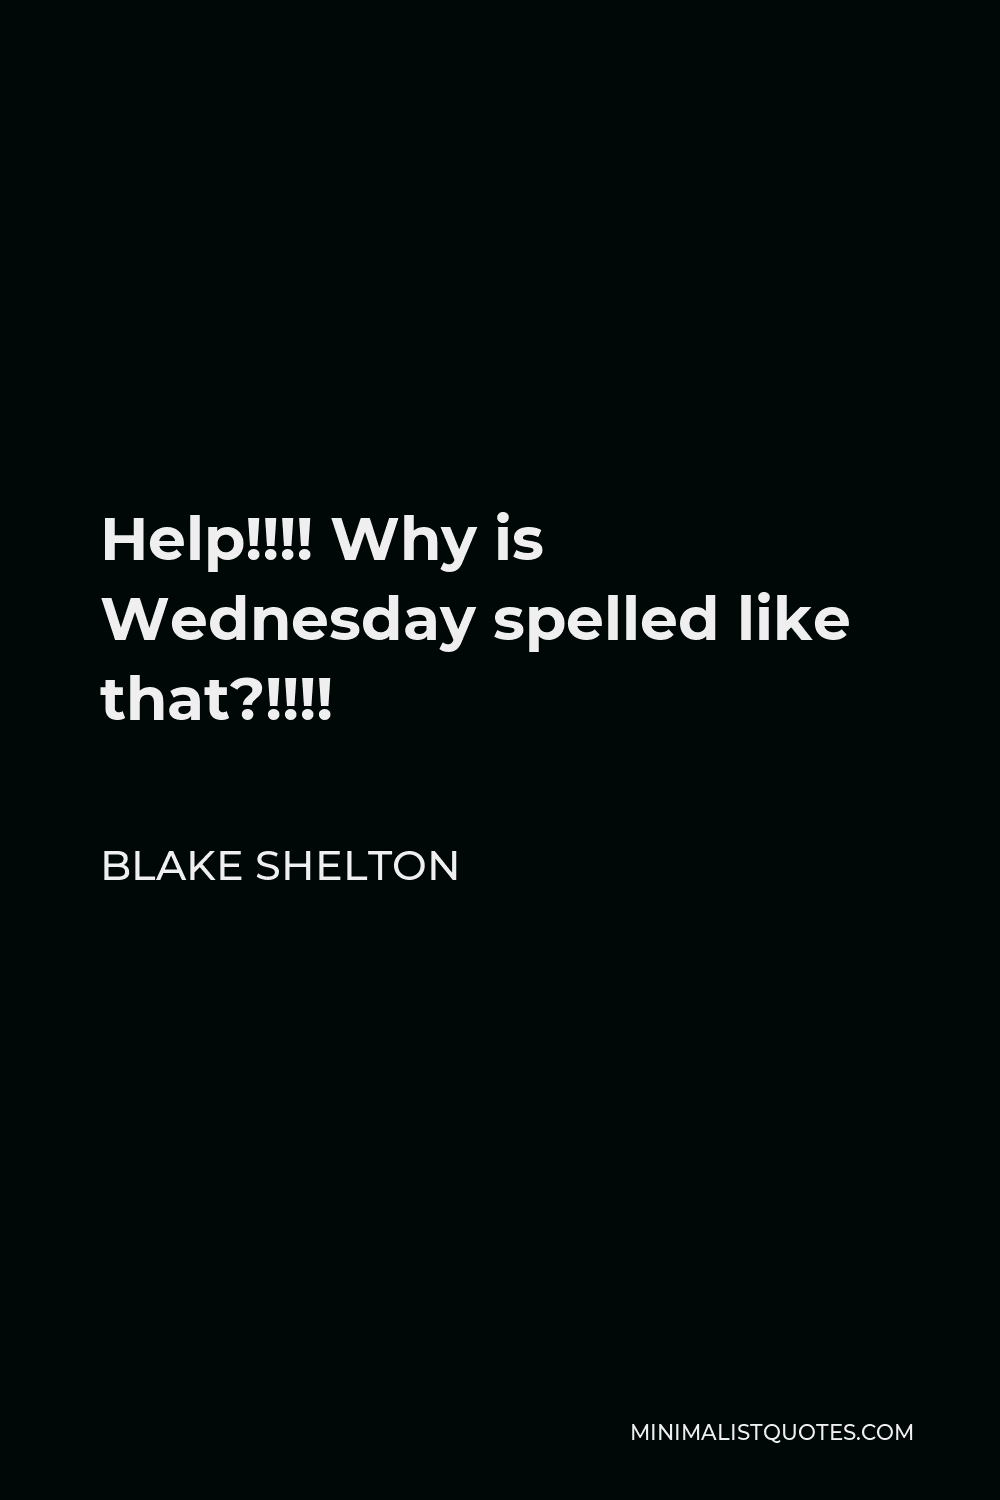 Blake Shelton Quote - Help!!!! Why is Wednesday spelled like that?!!!!